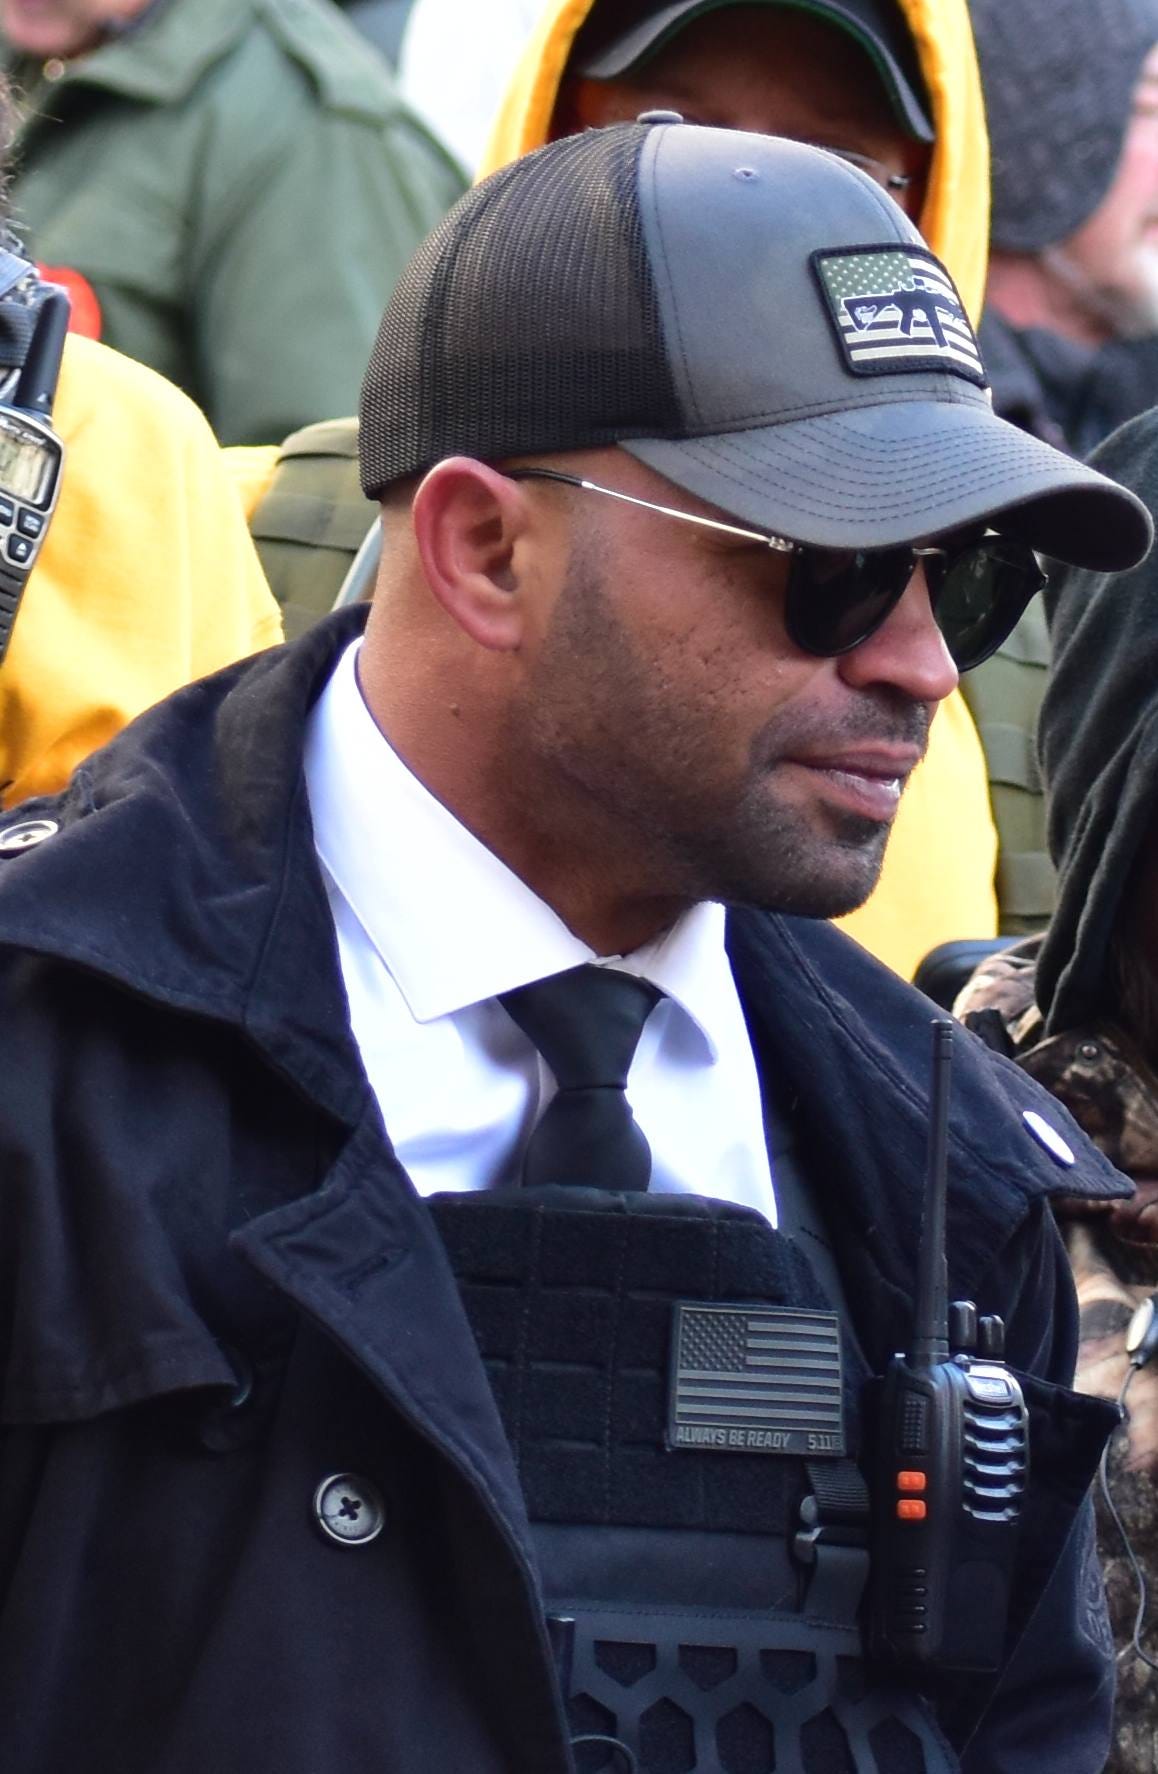 A picture of Enrique Tarrio in sunglasses and a suit, sitting in a crowd. He is wearing body armor under his suit jacket and a very official-looking communications device is strapped to it